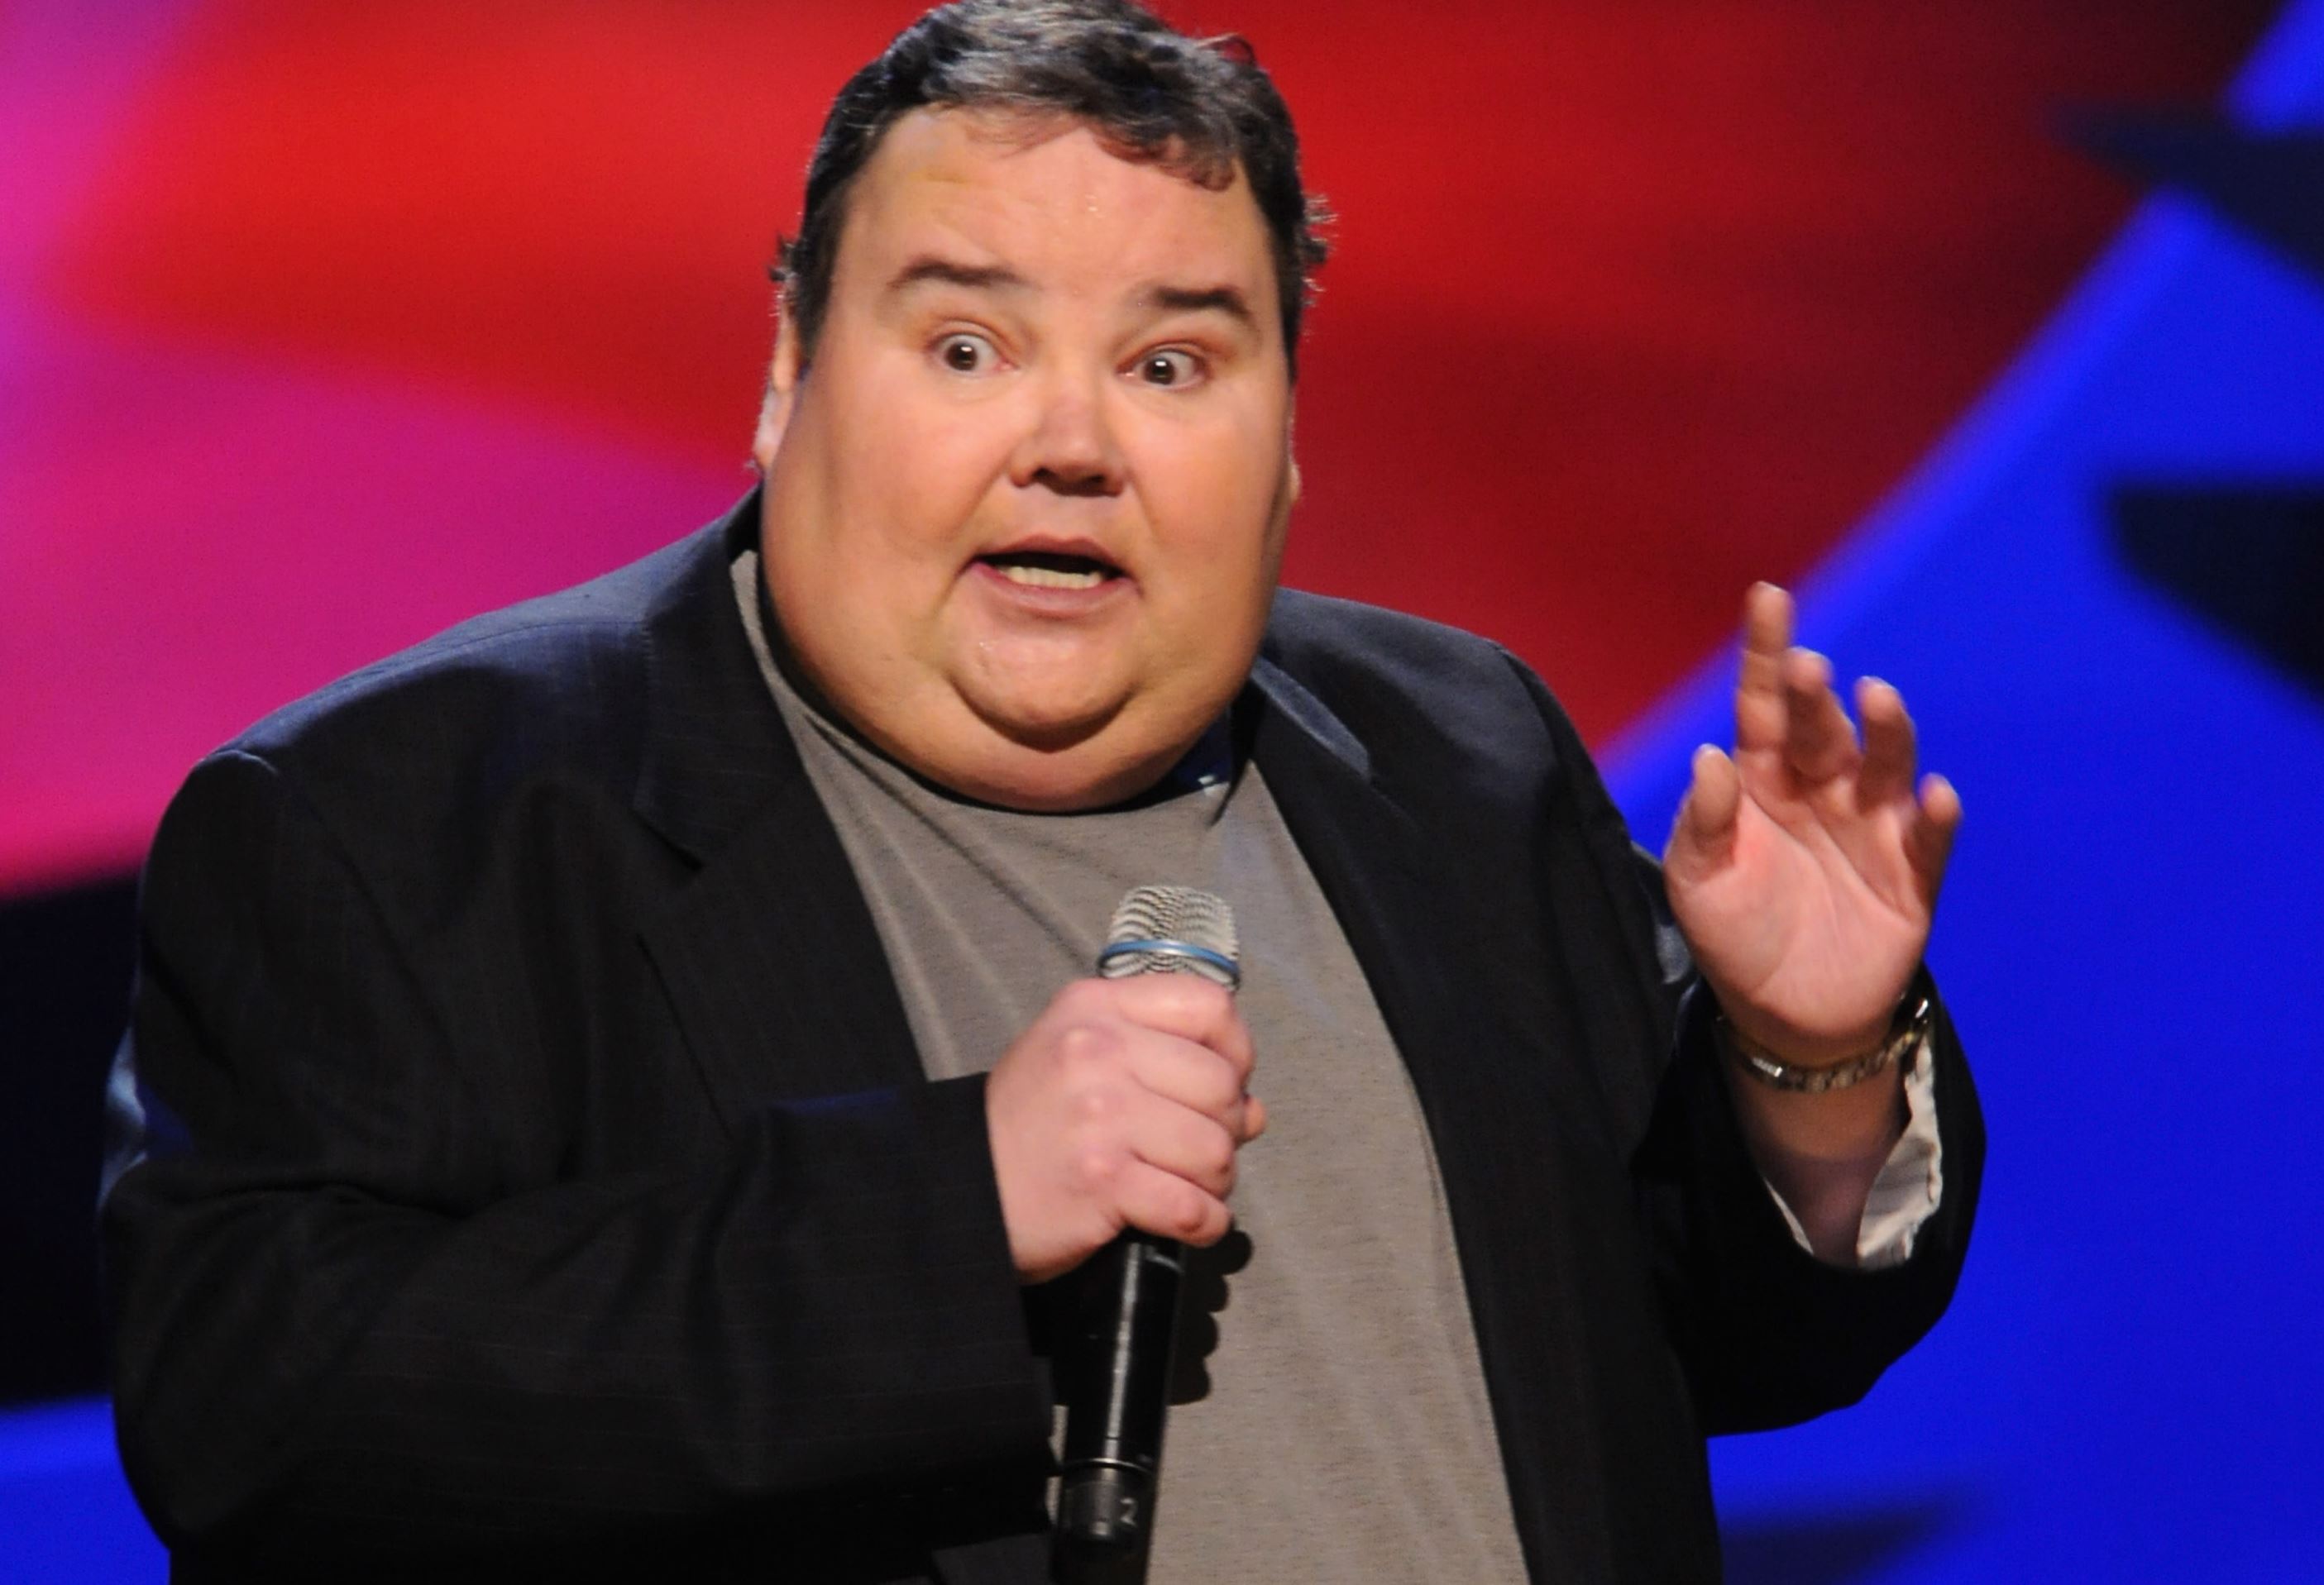 Fat White Stand Up Comedian 72